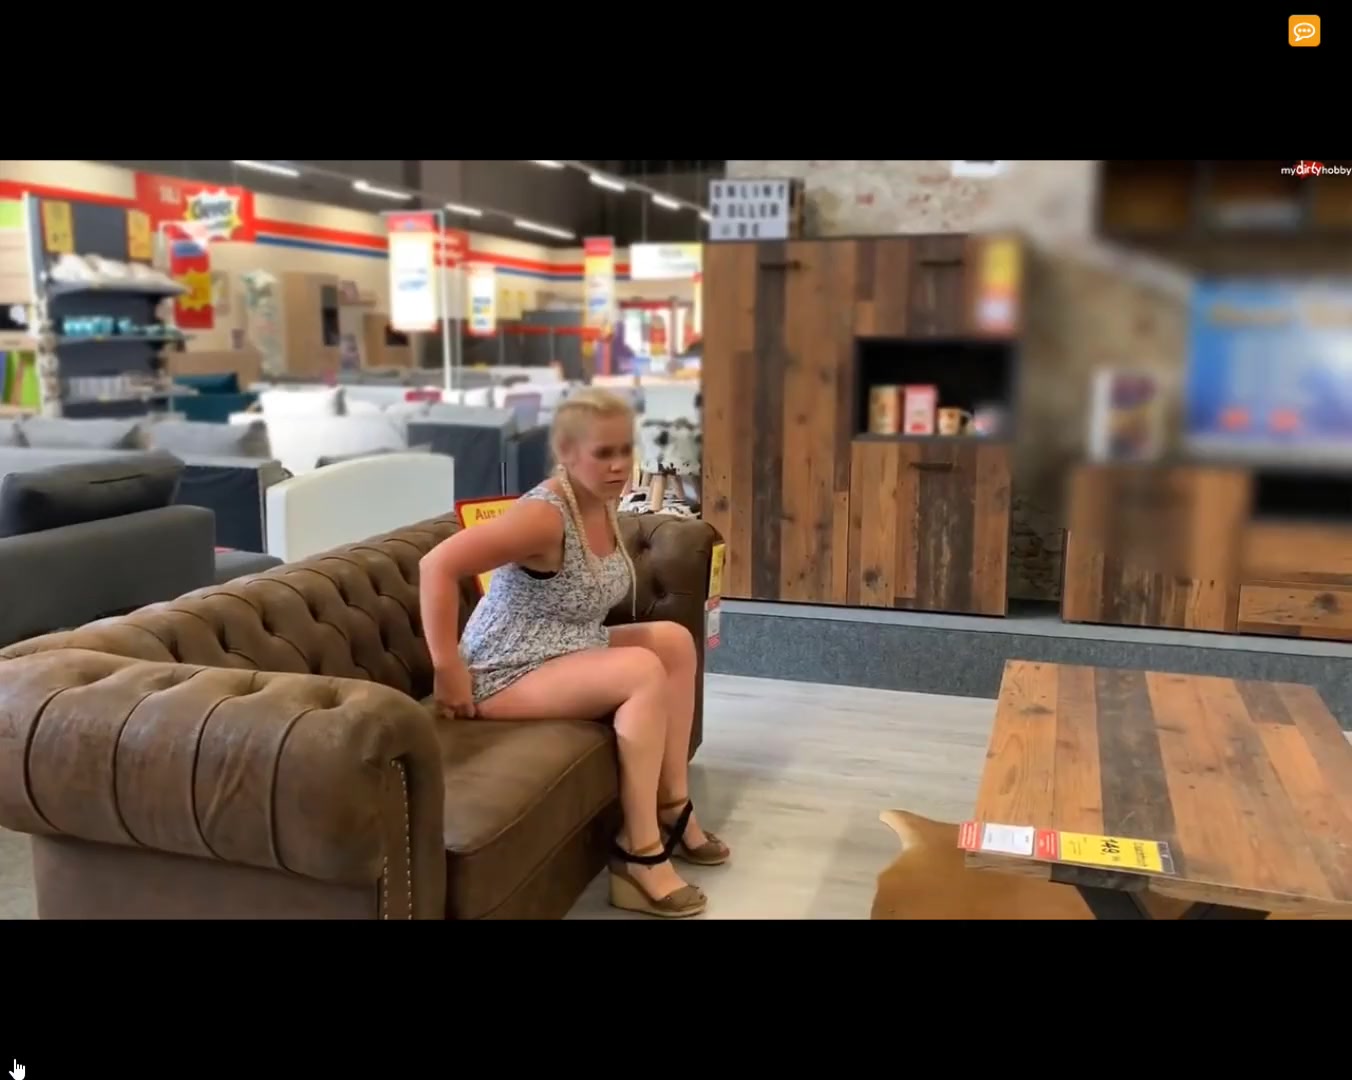 Woman pissing on a couch in furniture market image pic